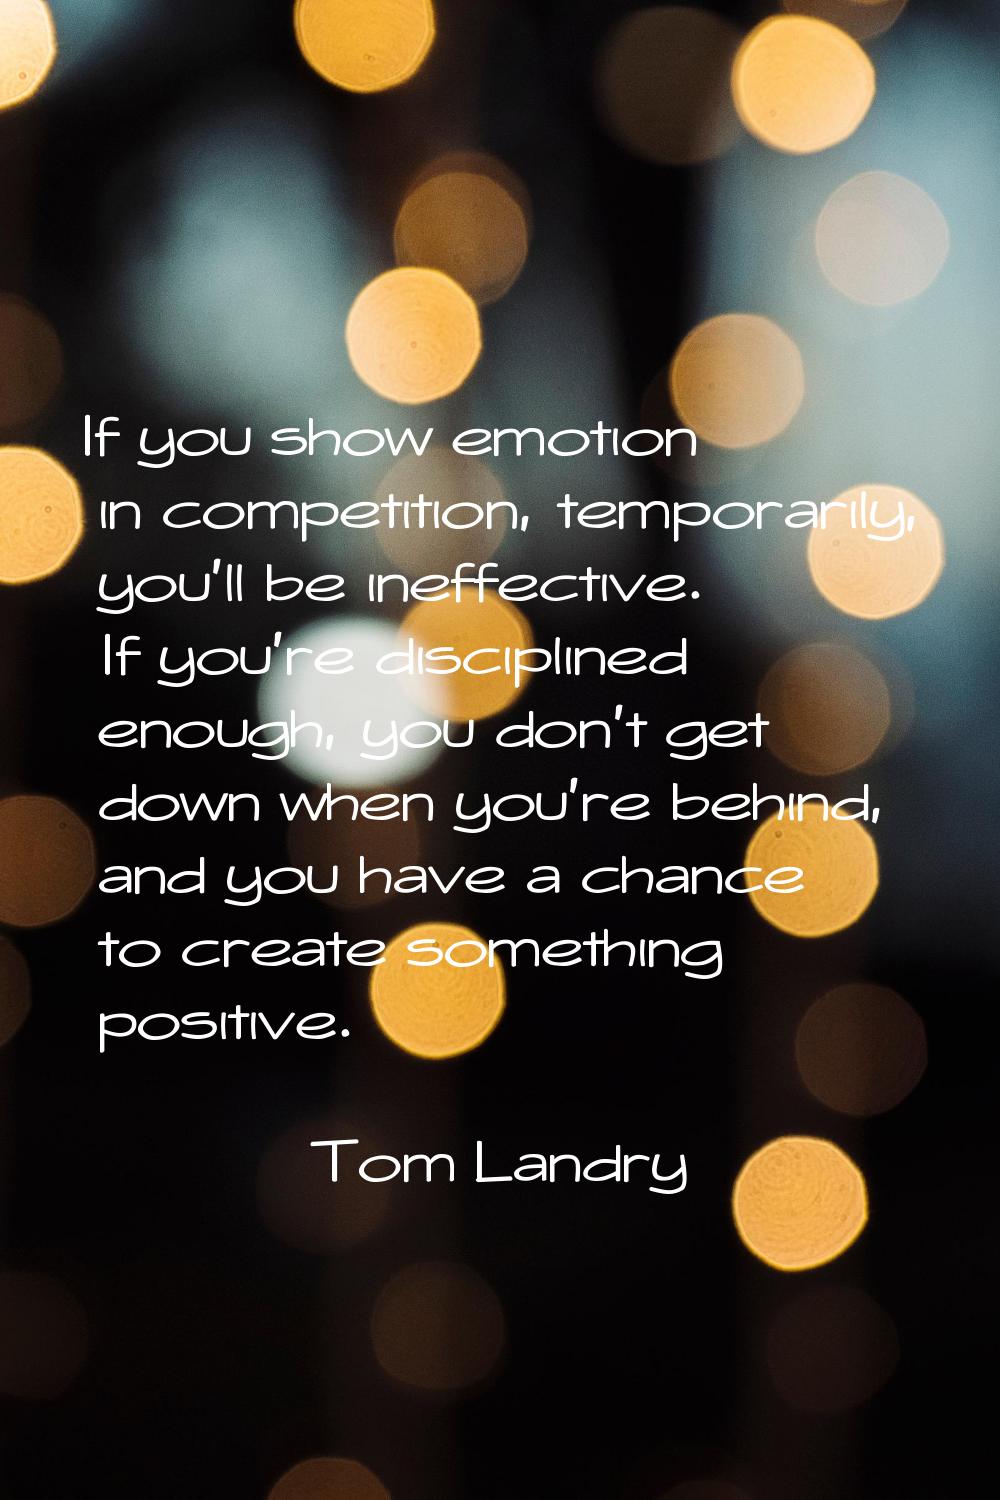 If you show emotion in competition, temporarily, you'll be ineffective. If you're disciplined enoug